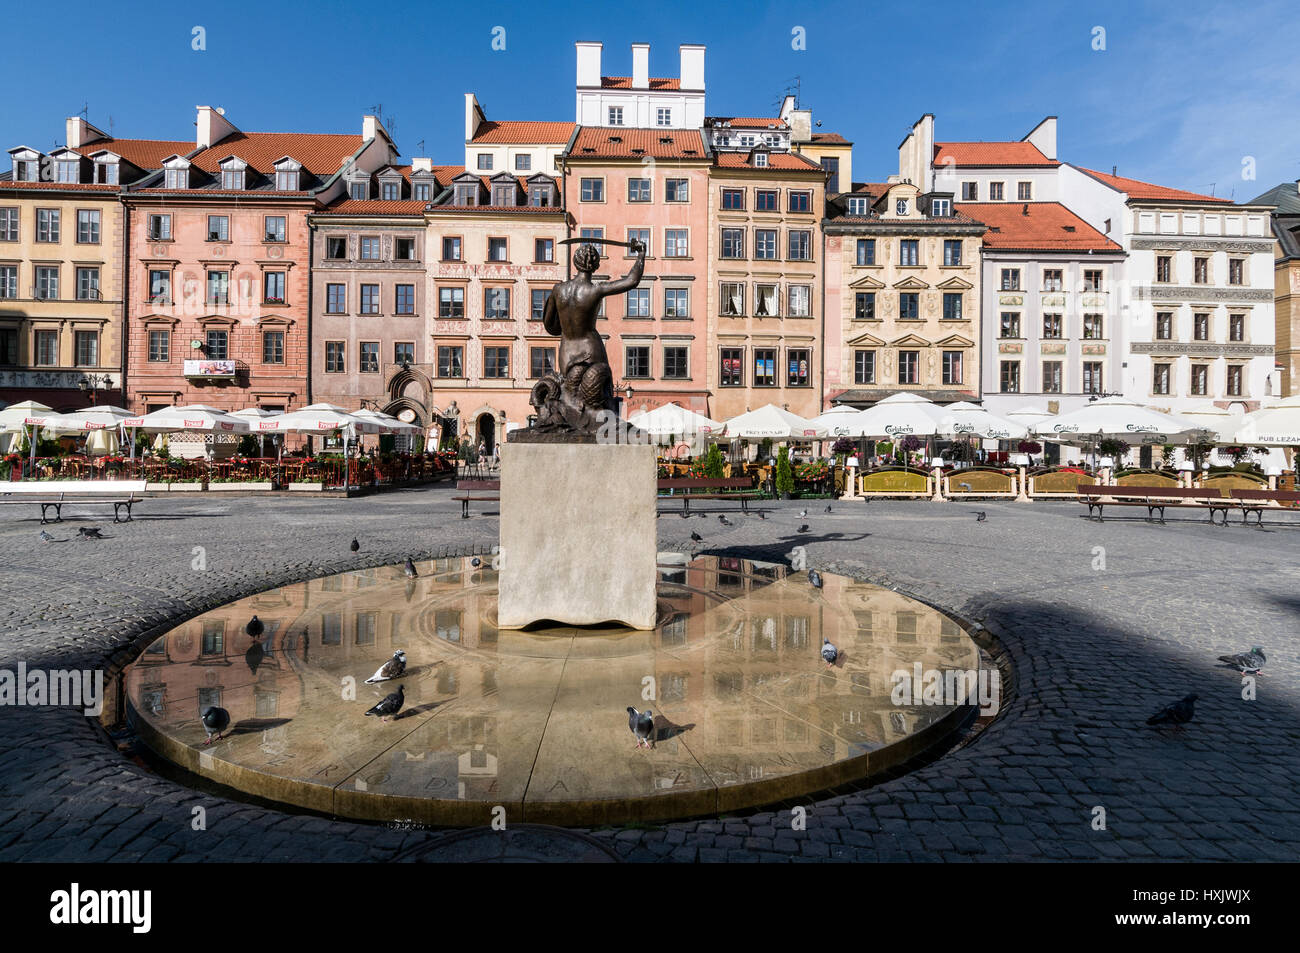 The Mermaid, symbol and patron of the city of Warsaw is embraced in the City Coat of Arms. The statue is  in the centre of the Warsaw's Old Town Marke Stock Photo